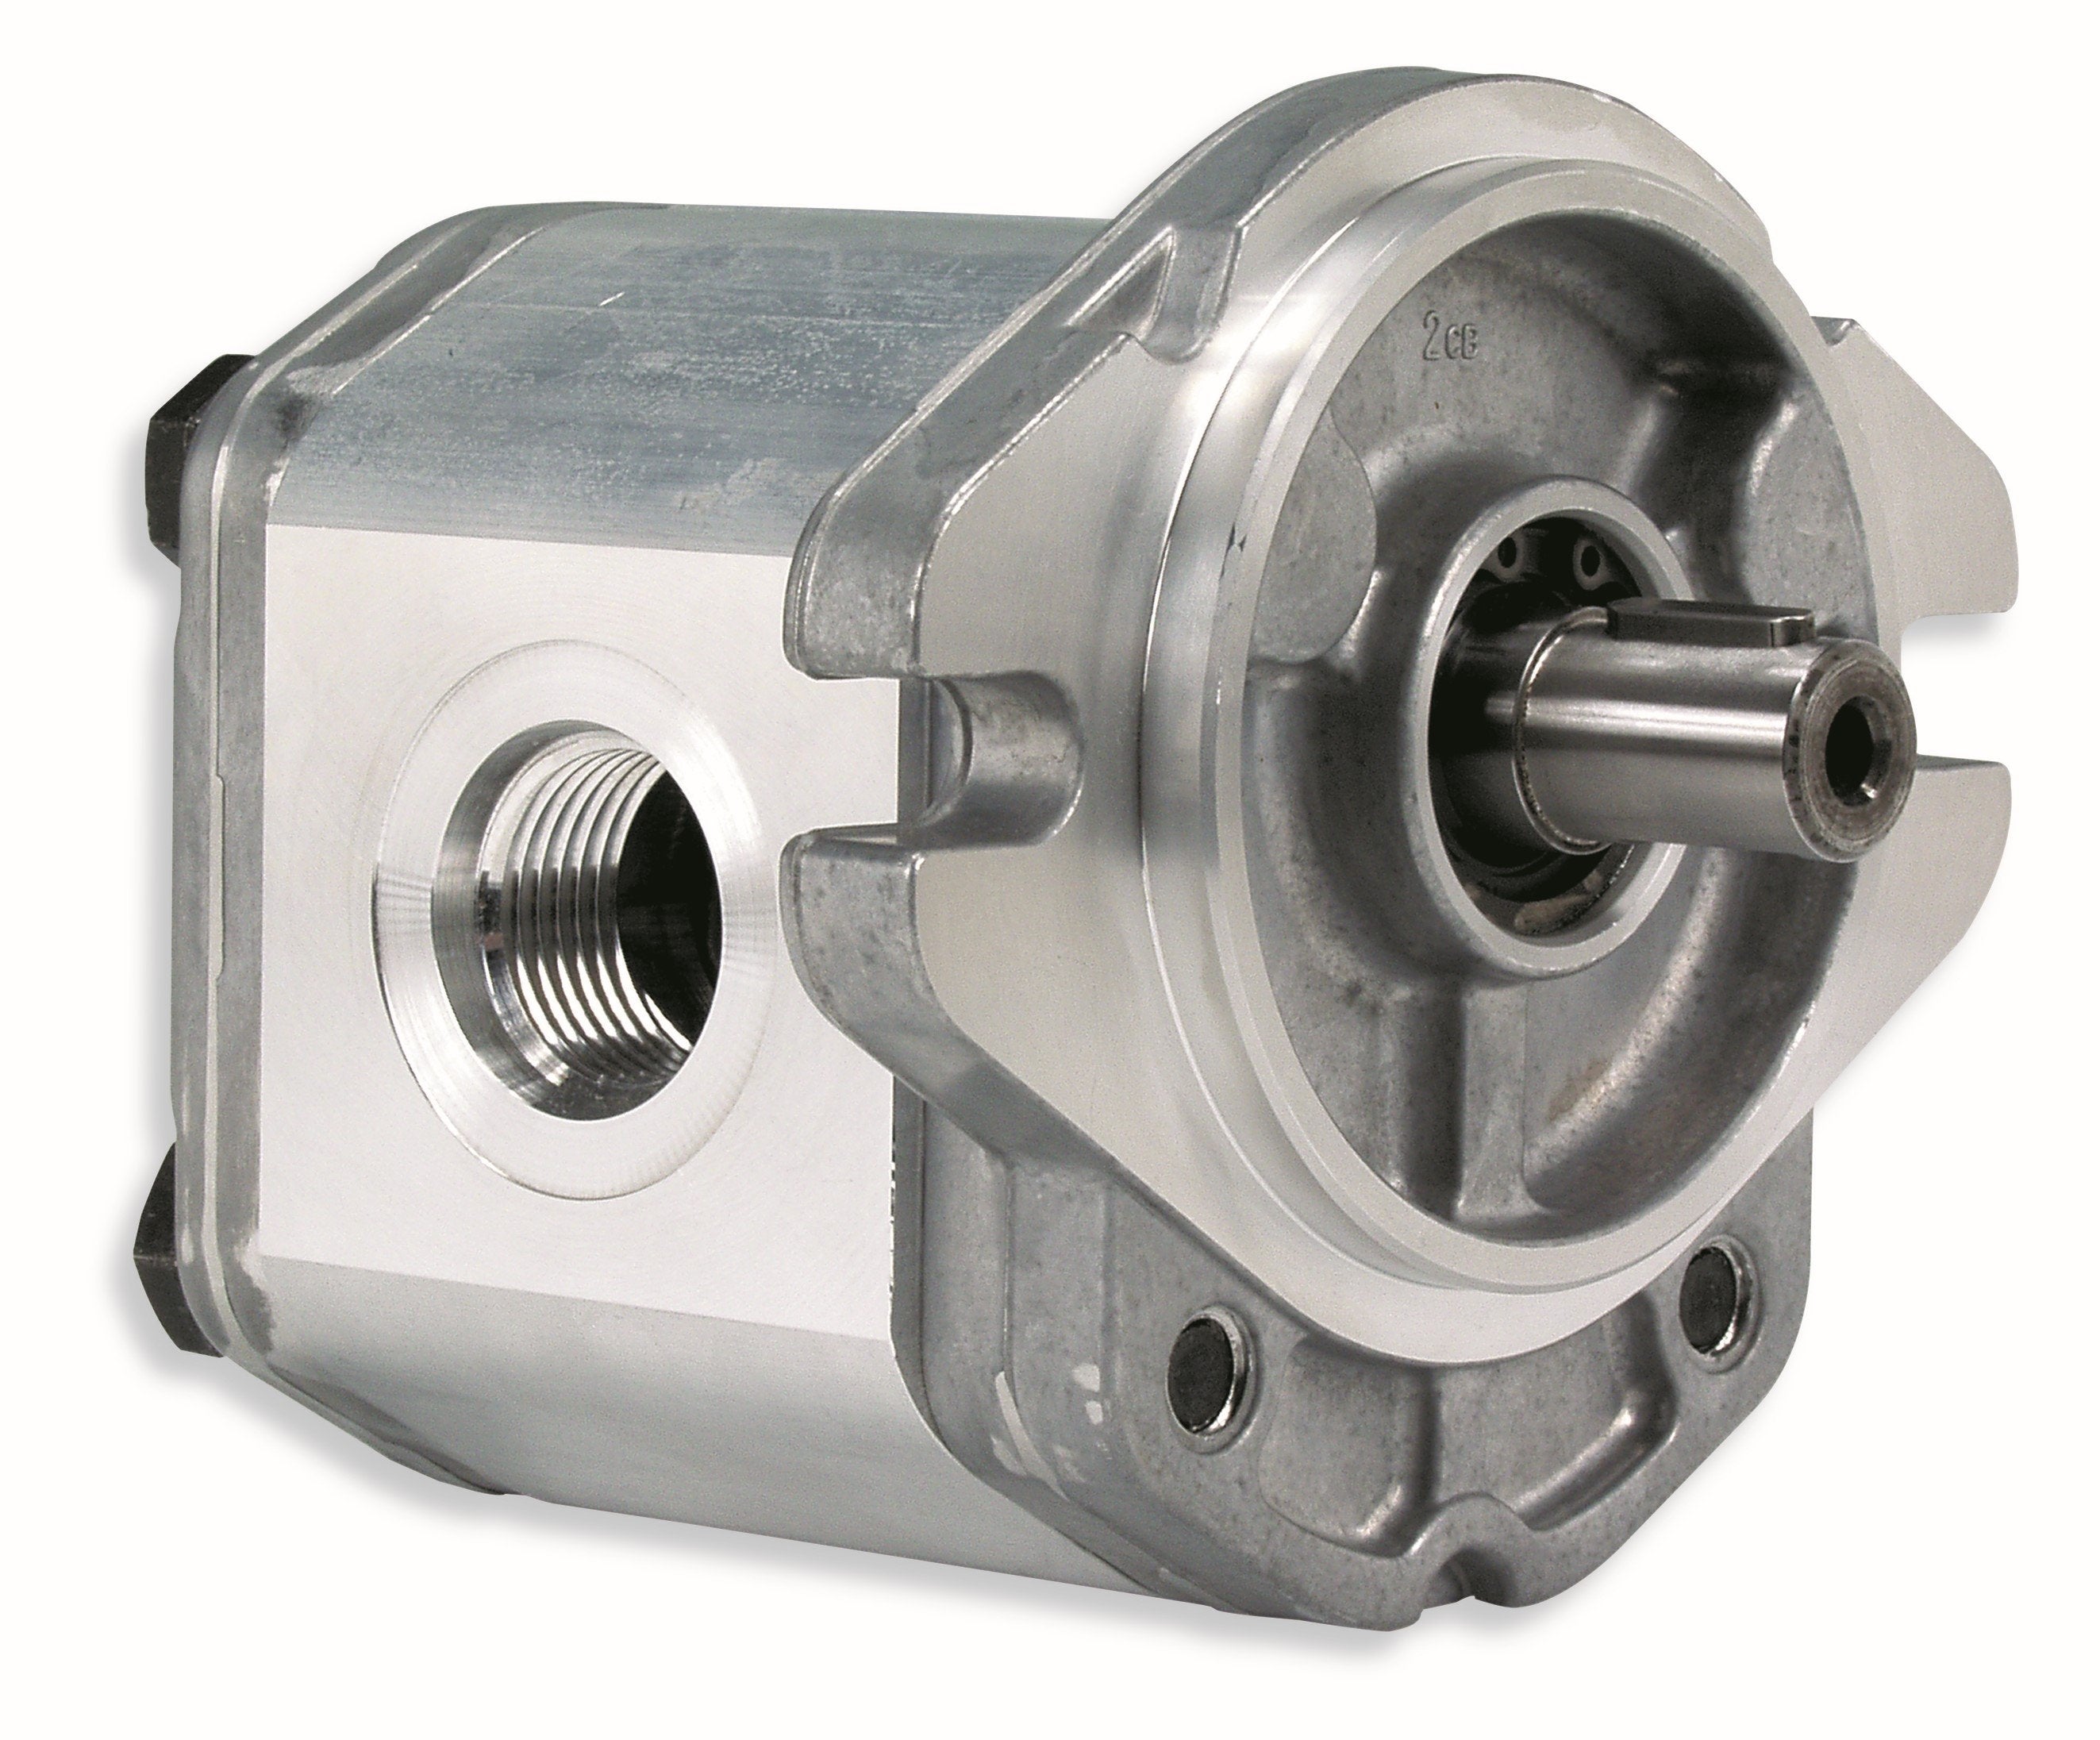 GHM1A-R-4-S1-E2 : Marzocchi Gear Motor, Bidirectional, 2.8cc, 3915psi rated, 5000RPM, 0.5 (1/2") #8 SAE ports, 9T 20/40DP Splined Shaft